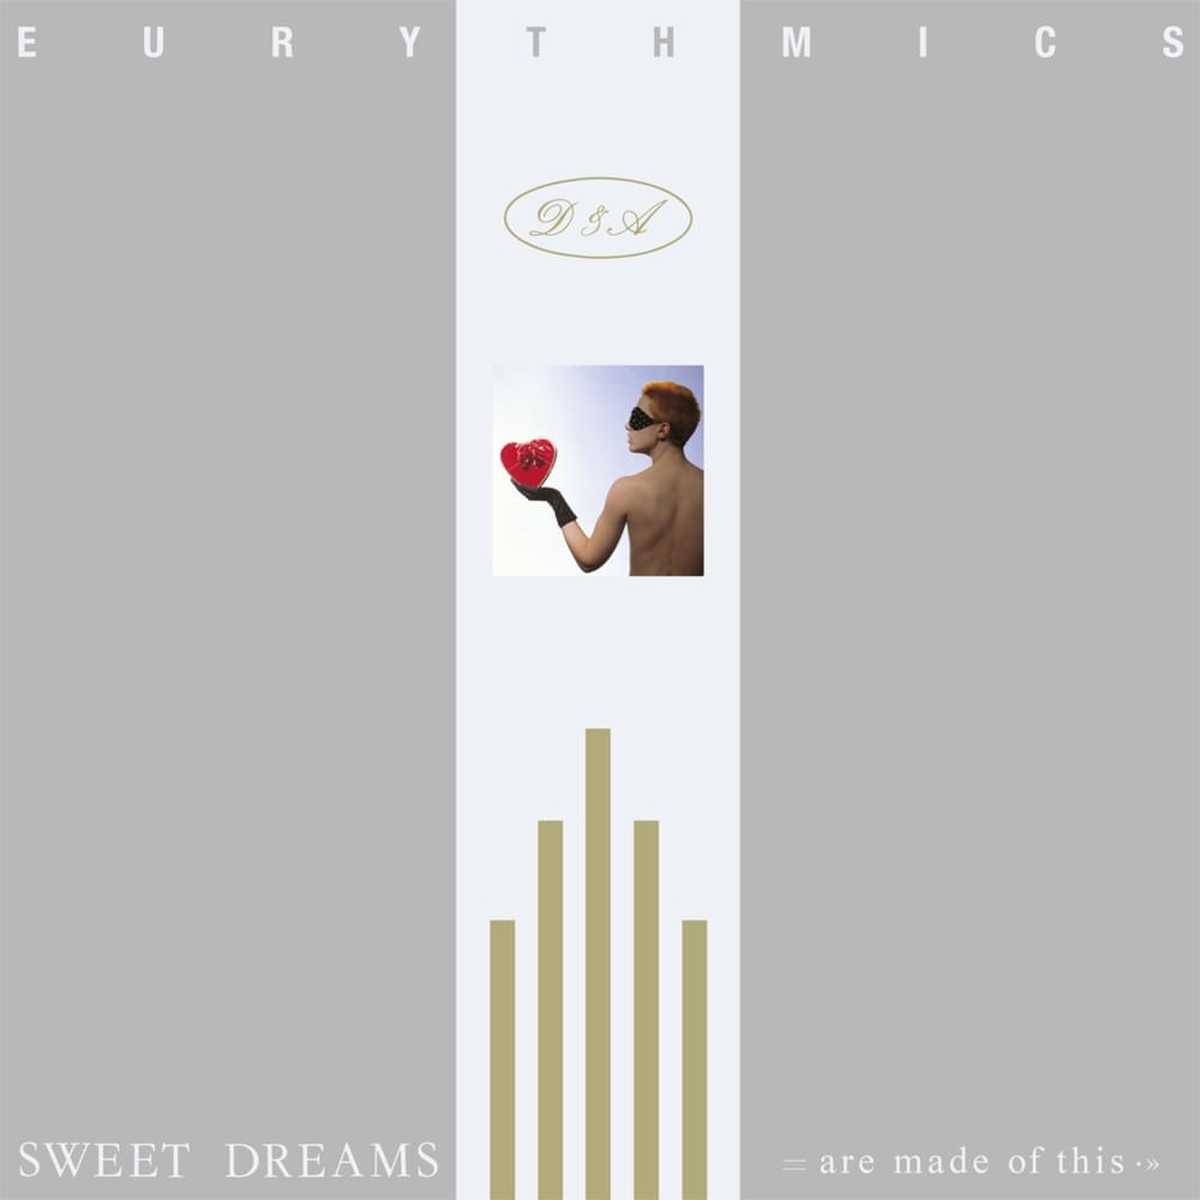 Sweet Dreams (Are Made of This) testo Eurythmics